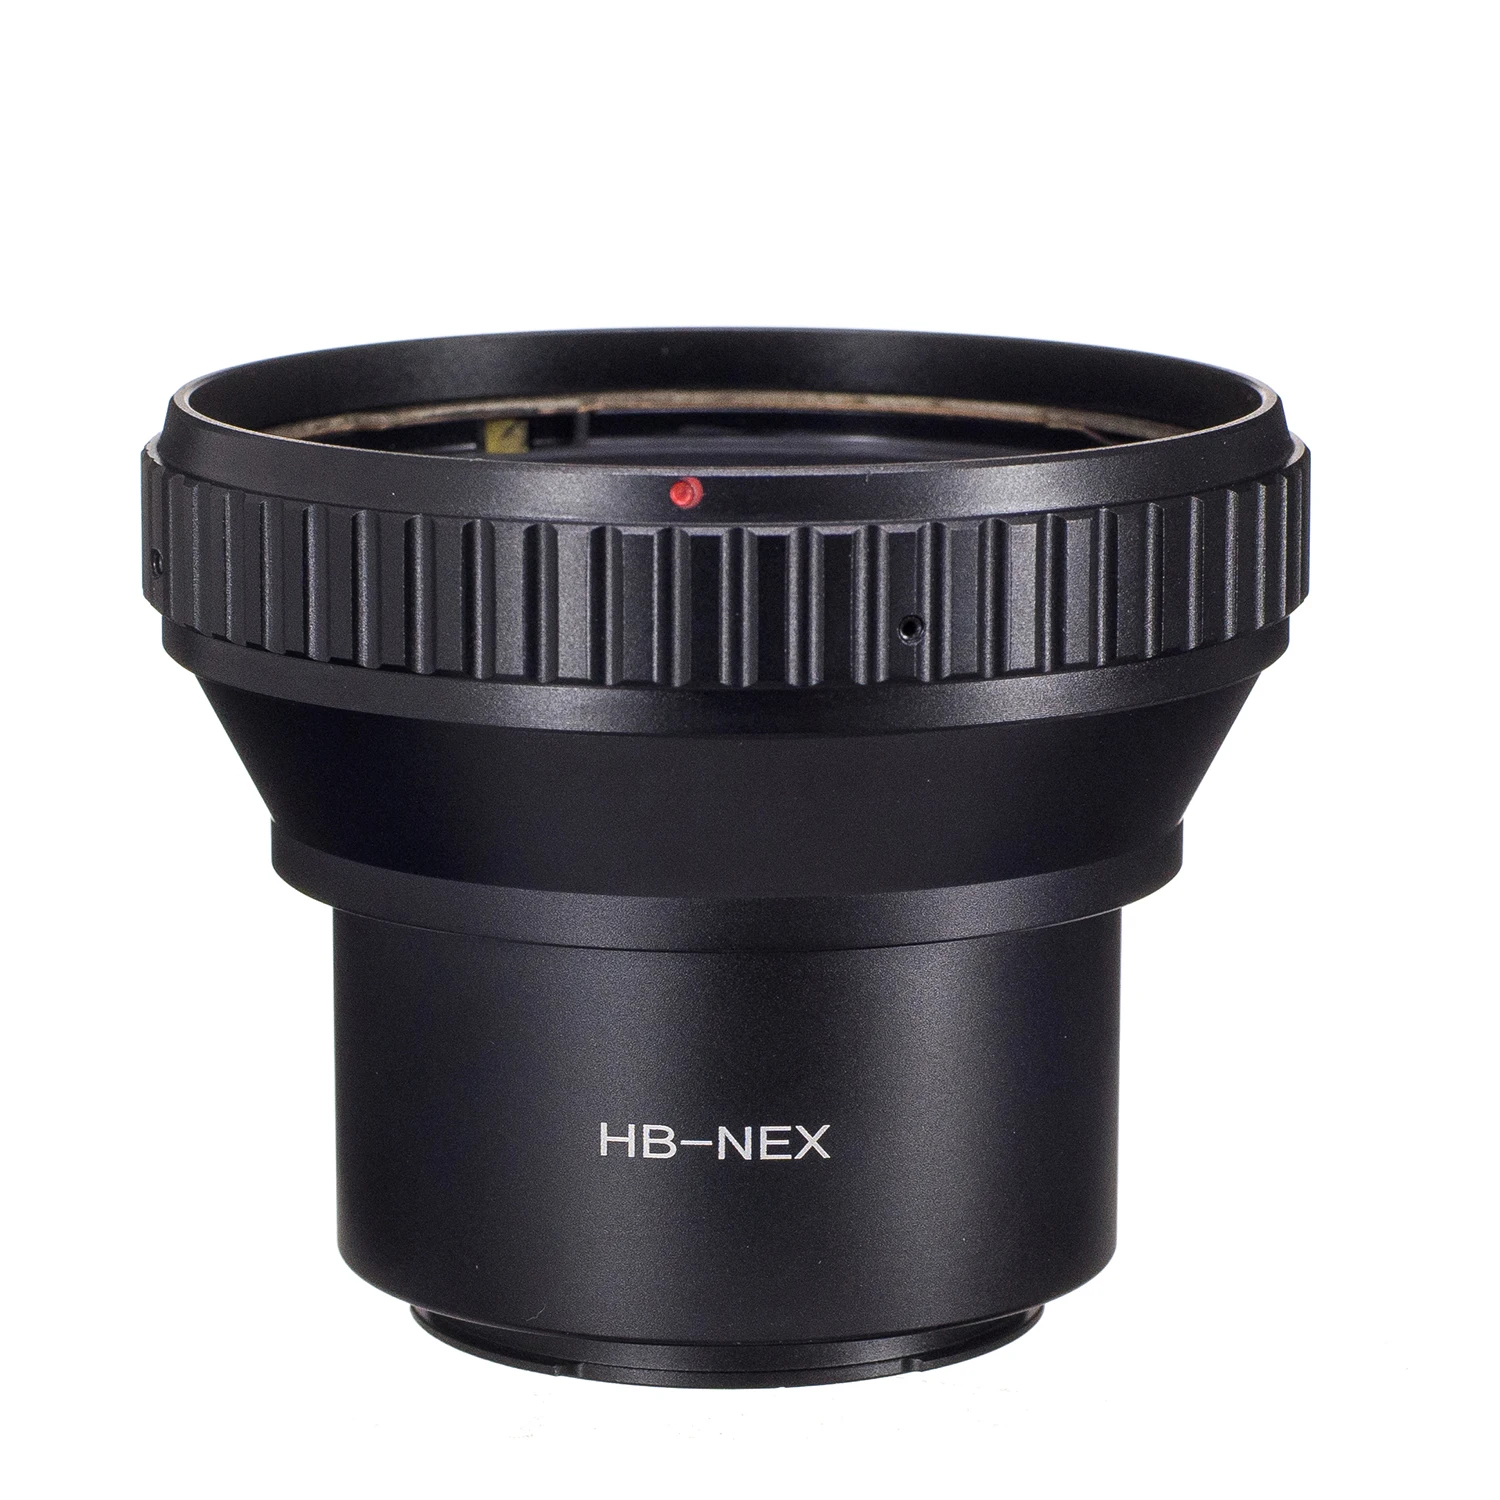 

HB-NEX adapter ring with tripod for Hasselblad V C CF hb lens to sony E mount A7 A7s a7r2 a7r3 a7r4 a9 a63000 nex6/7 camera